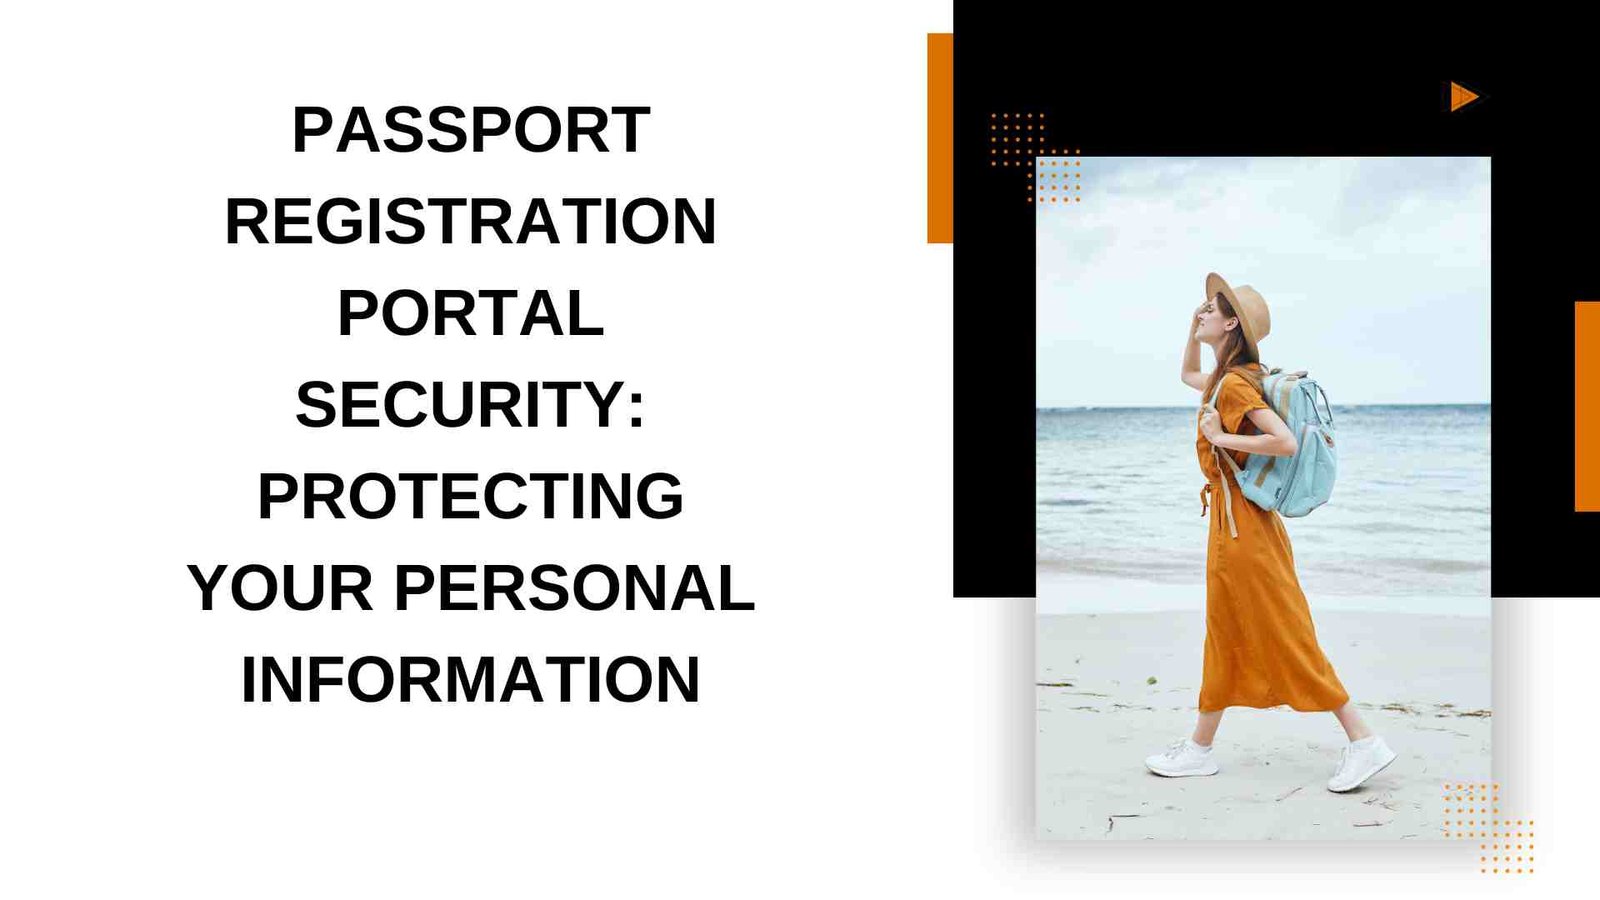 Passport Registration Portal Security: Protecting Your Personal Information